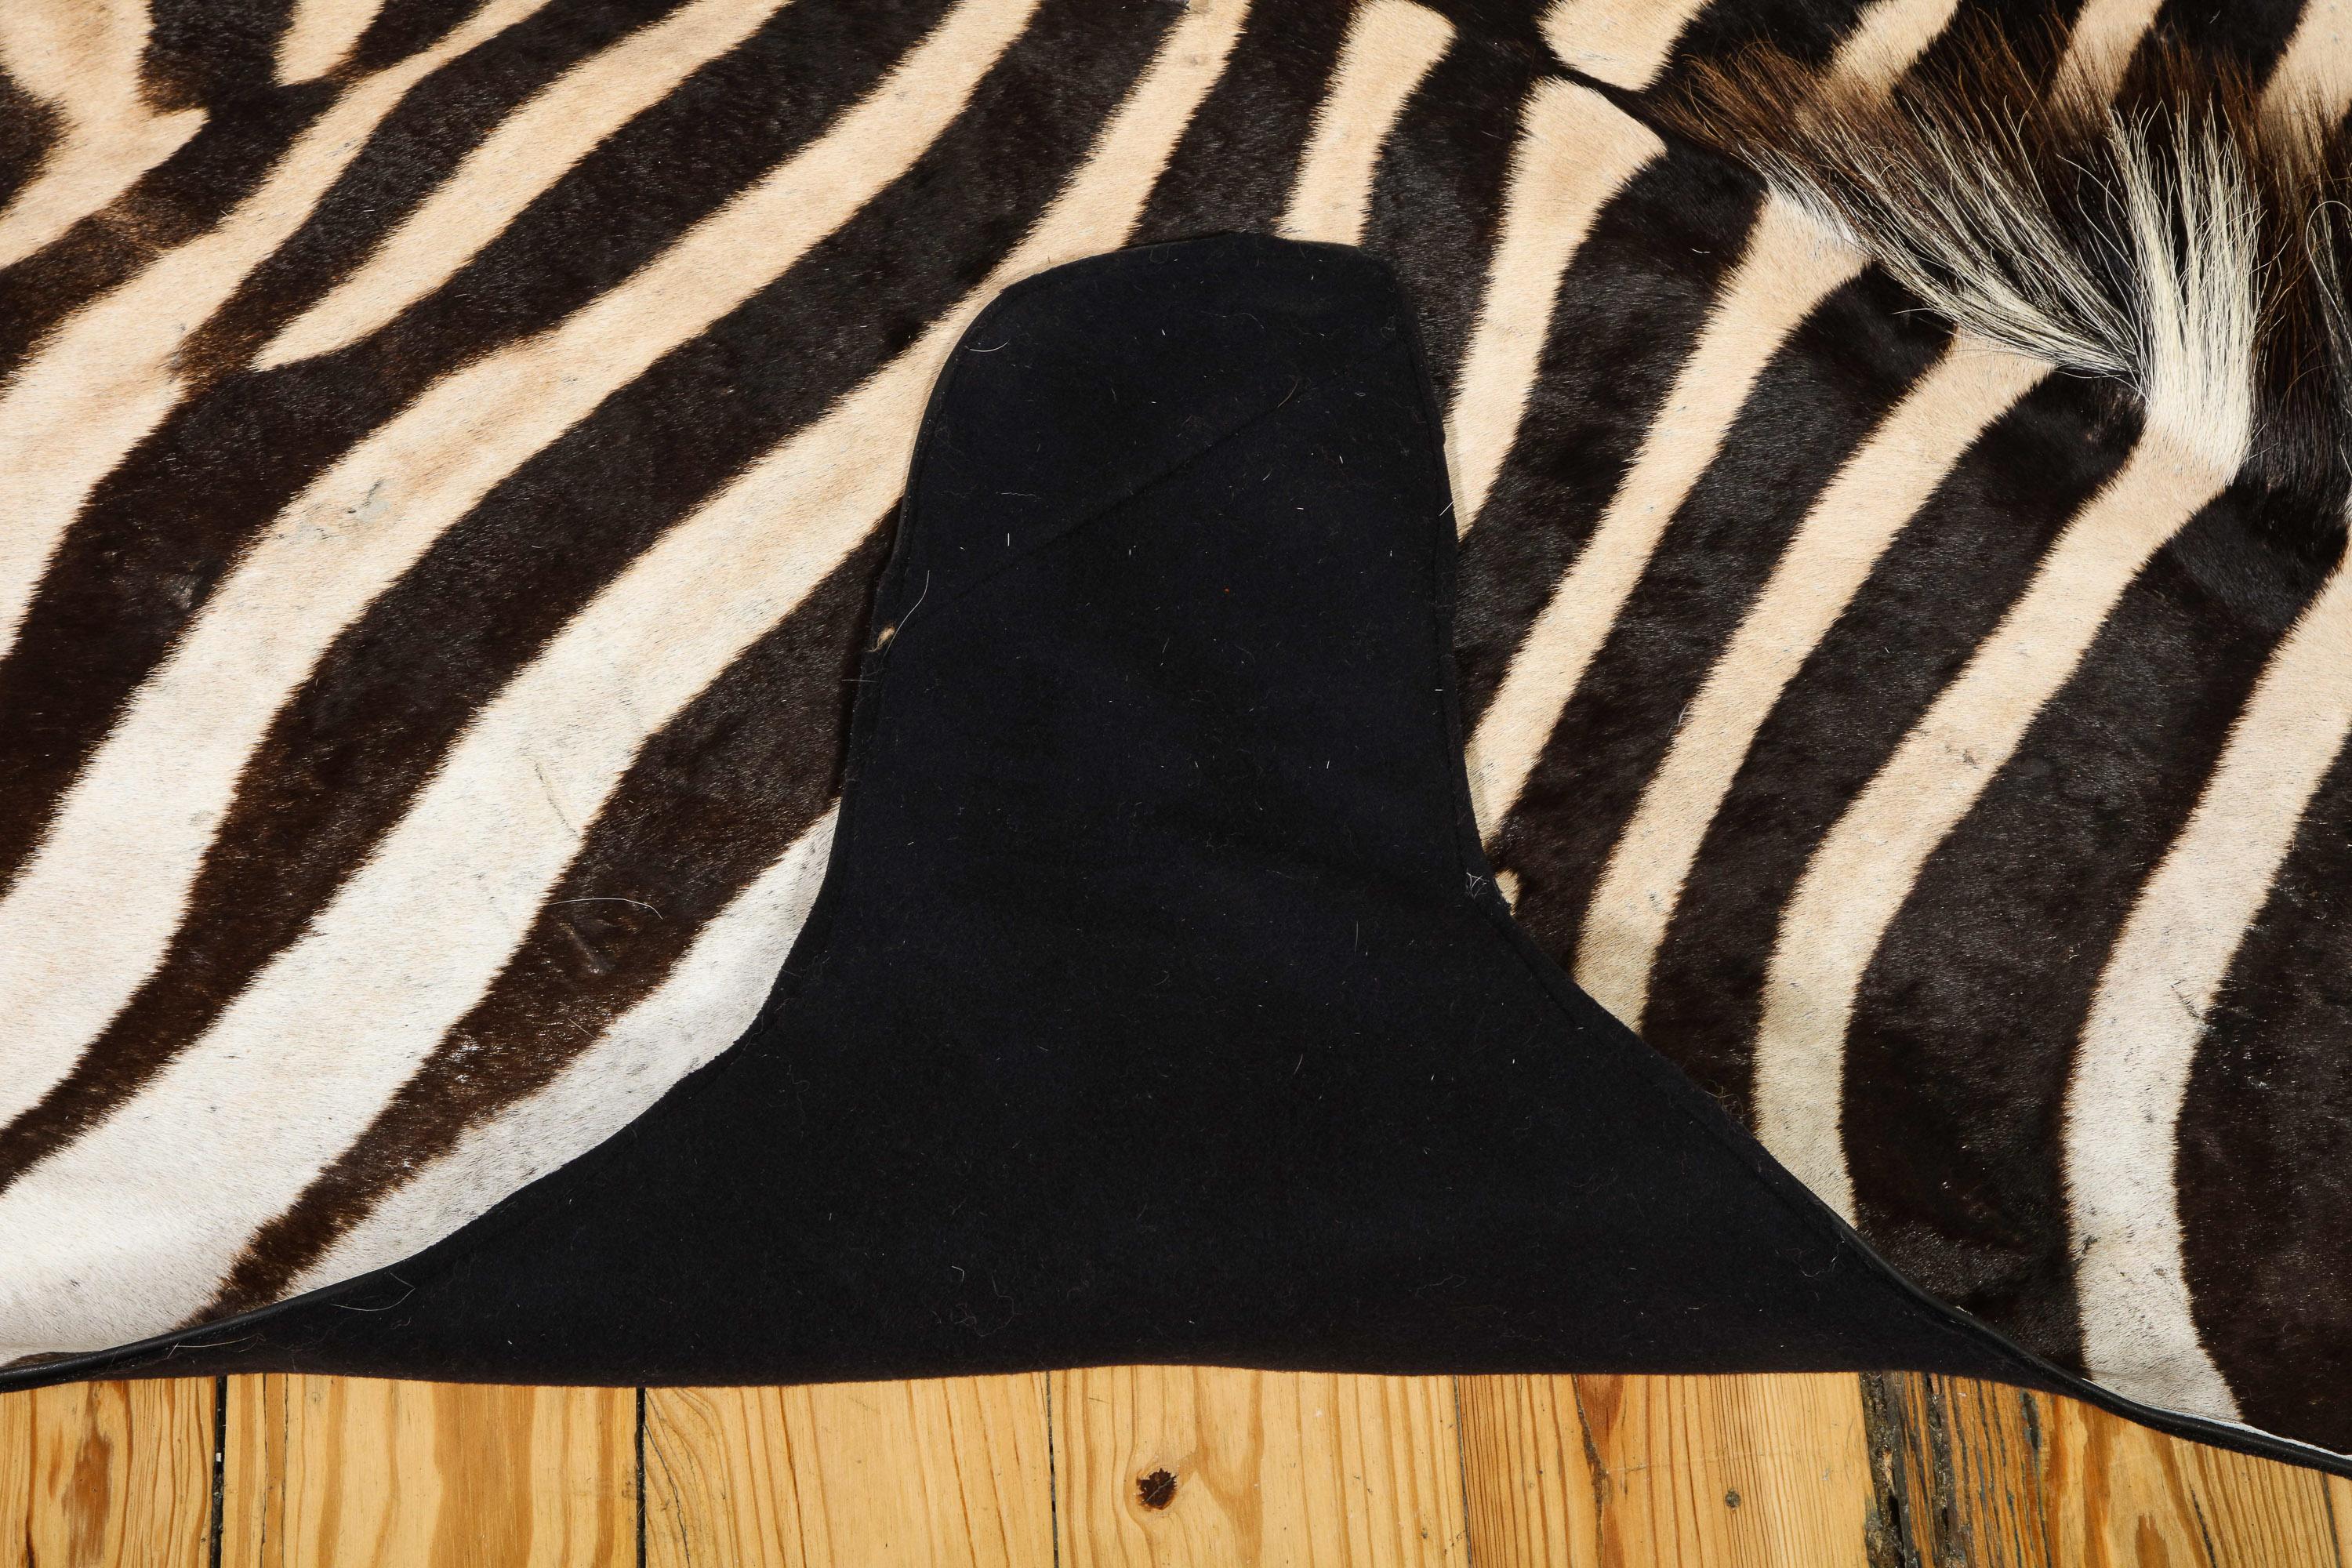 Hand-Crafted Zebra Rug, South Africa, Wool Felt Backed with Leather Trim, New Hide, In Stock For Sale